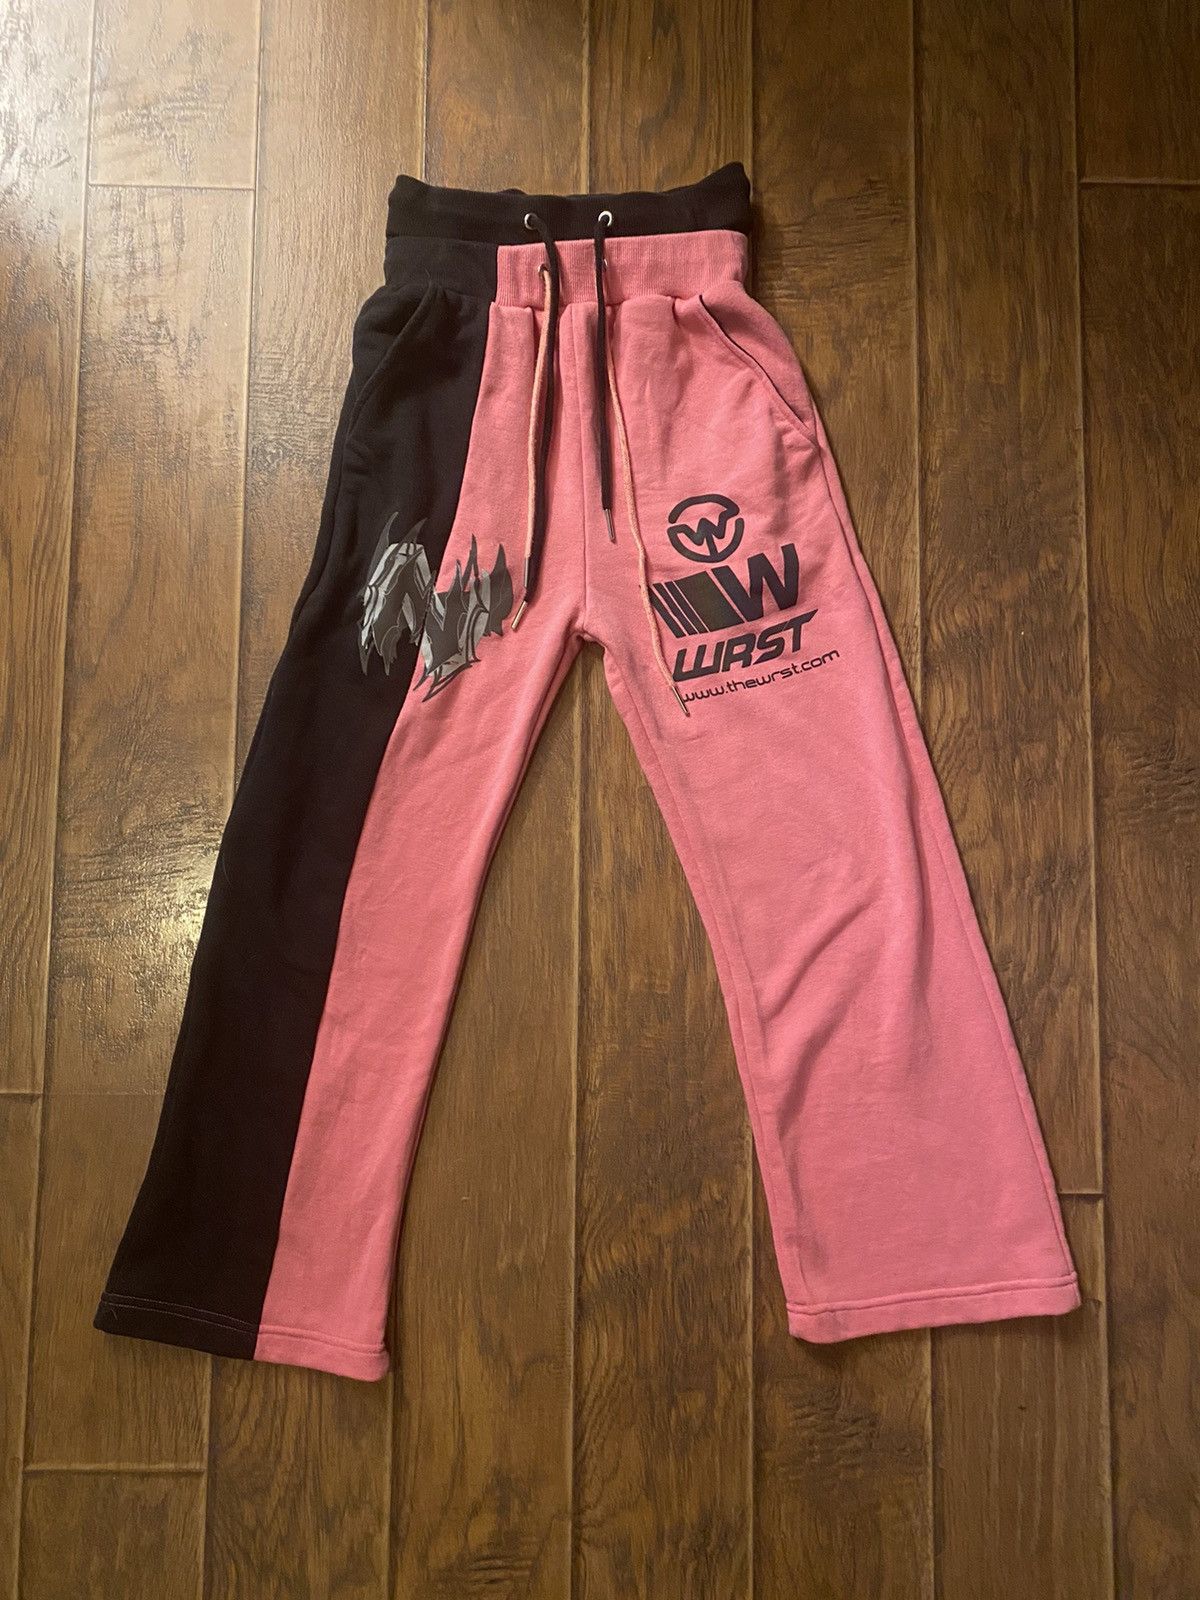 Thrifted Nightclub x The Wrst Double Waisted Sweatpants | Grailed